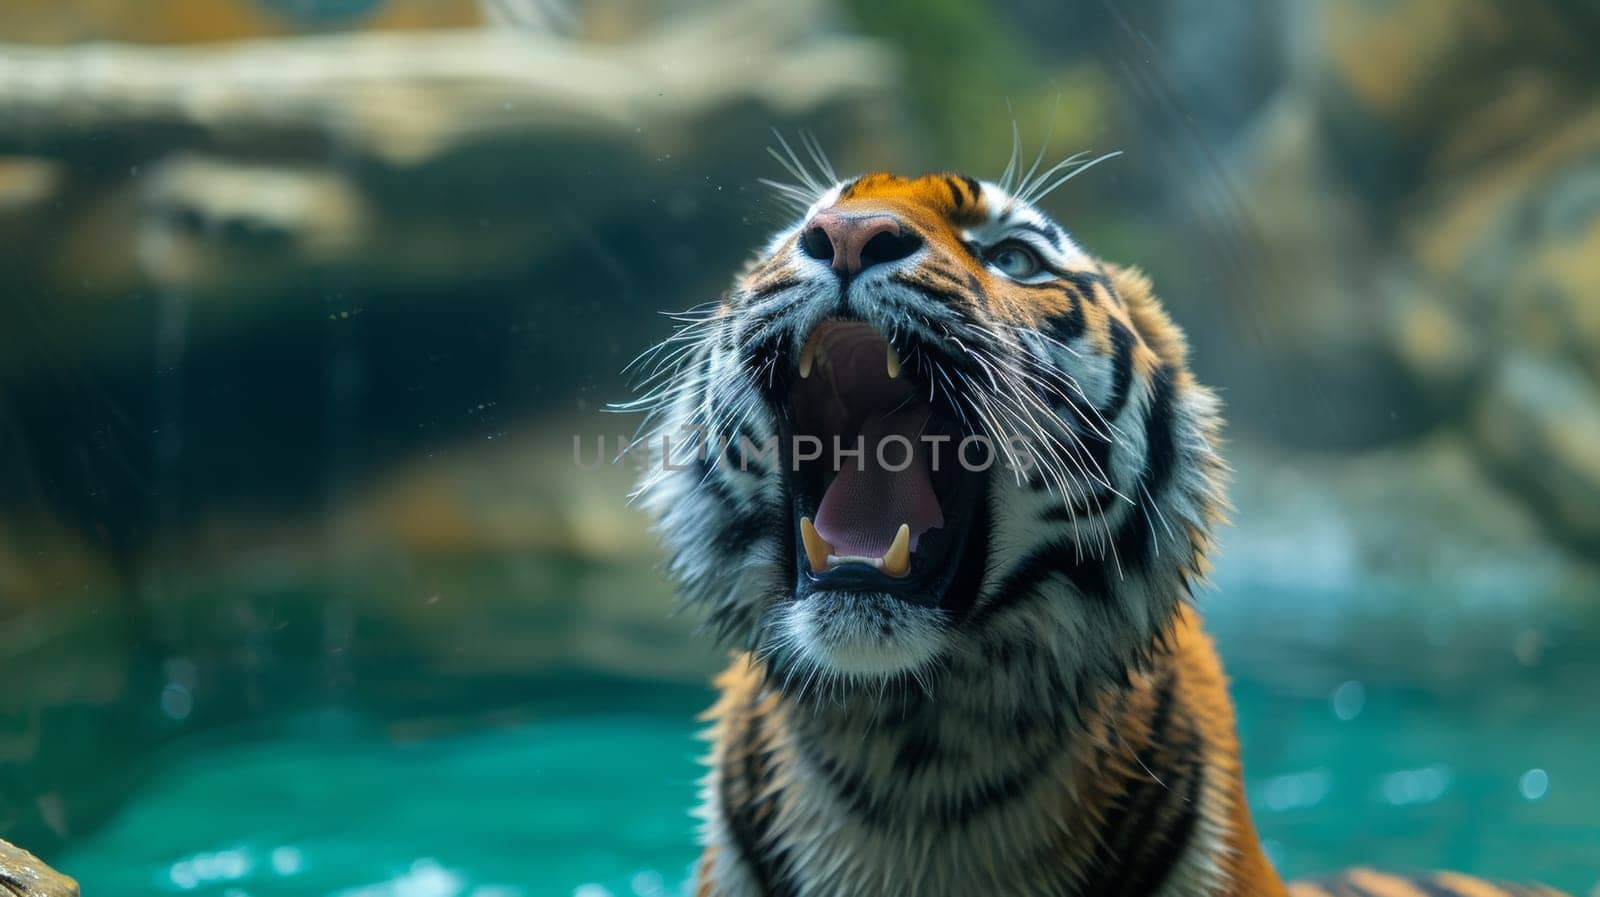 A tiger is roaring in the water with its mouth open, AI by starush